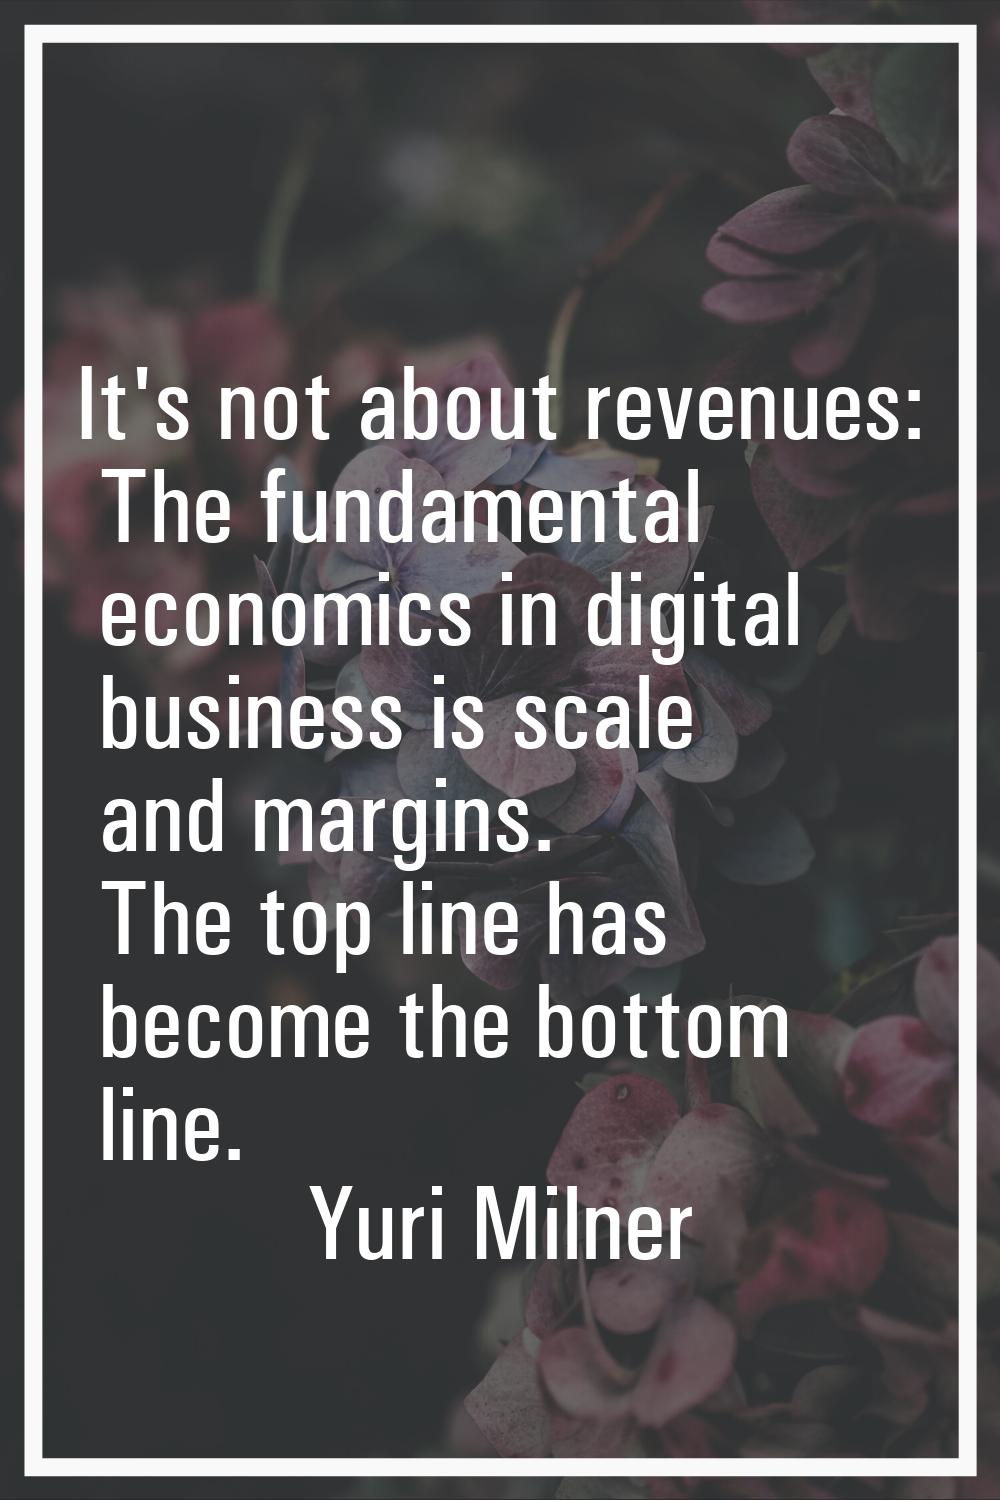 It's not about revenues: The fundamental economics in digital business is scale and margins. The to